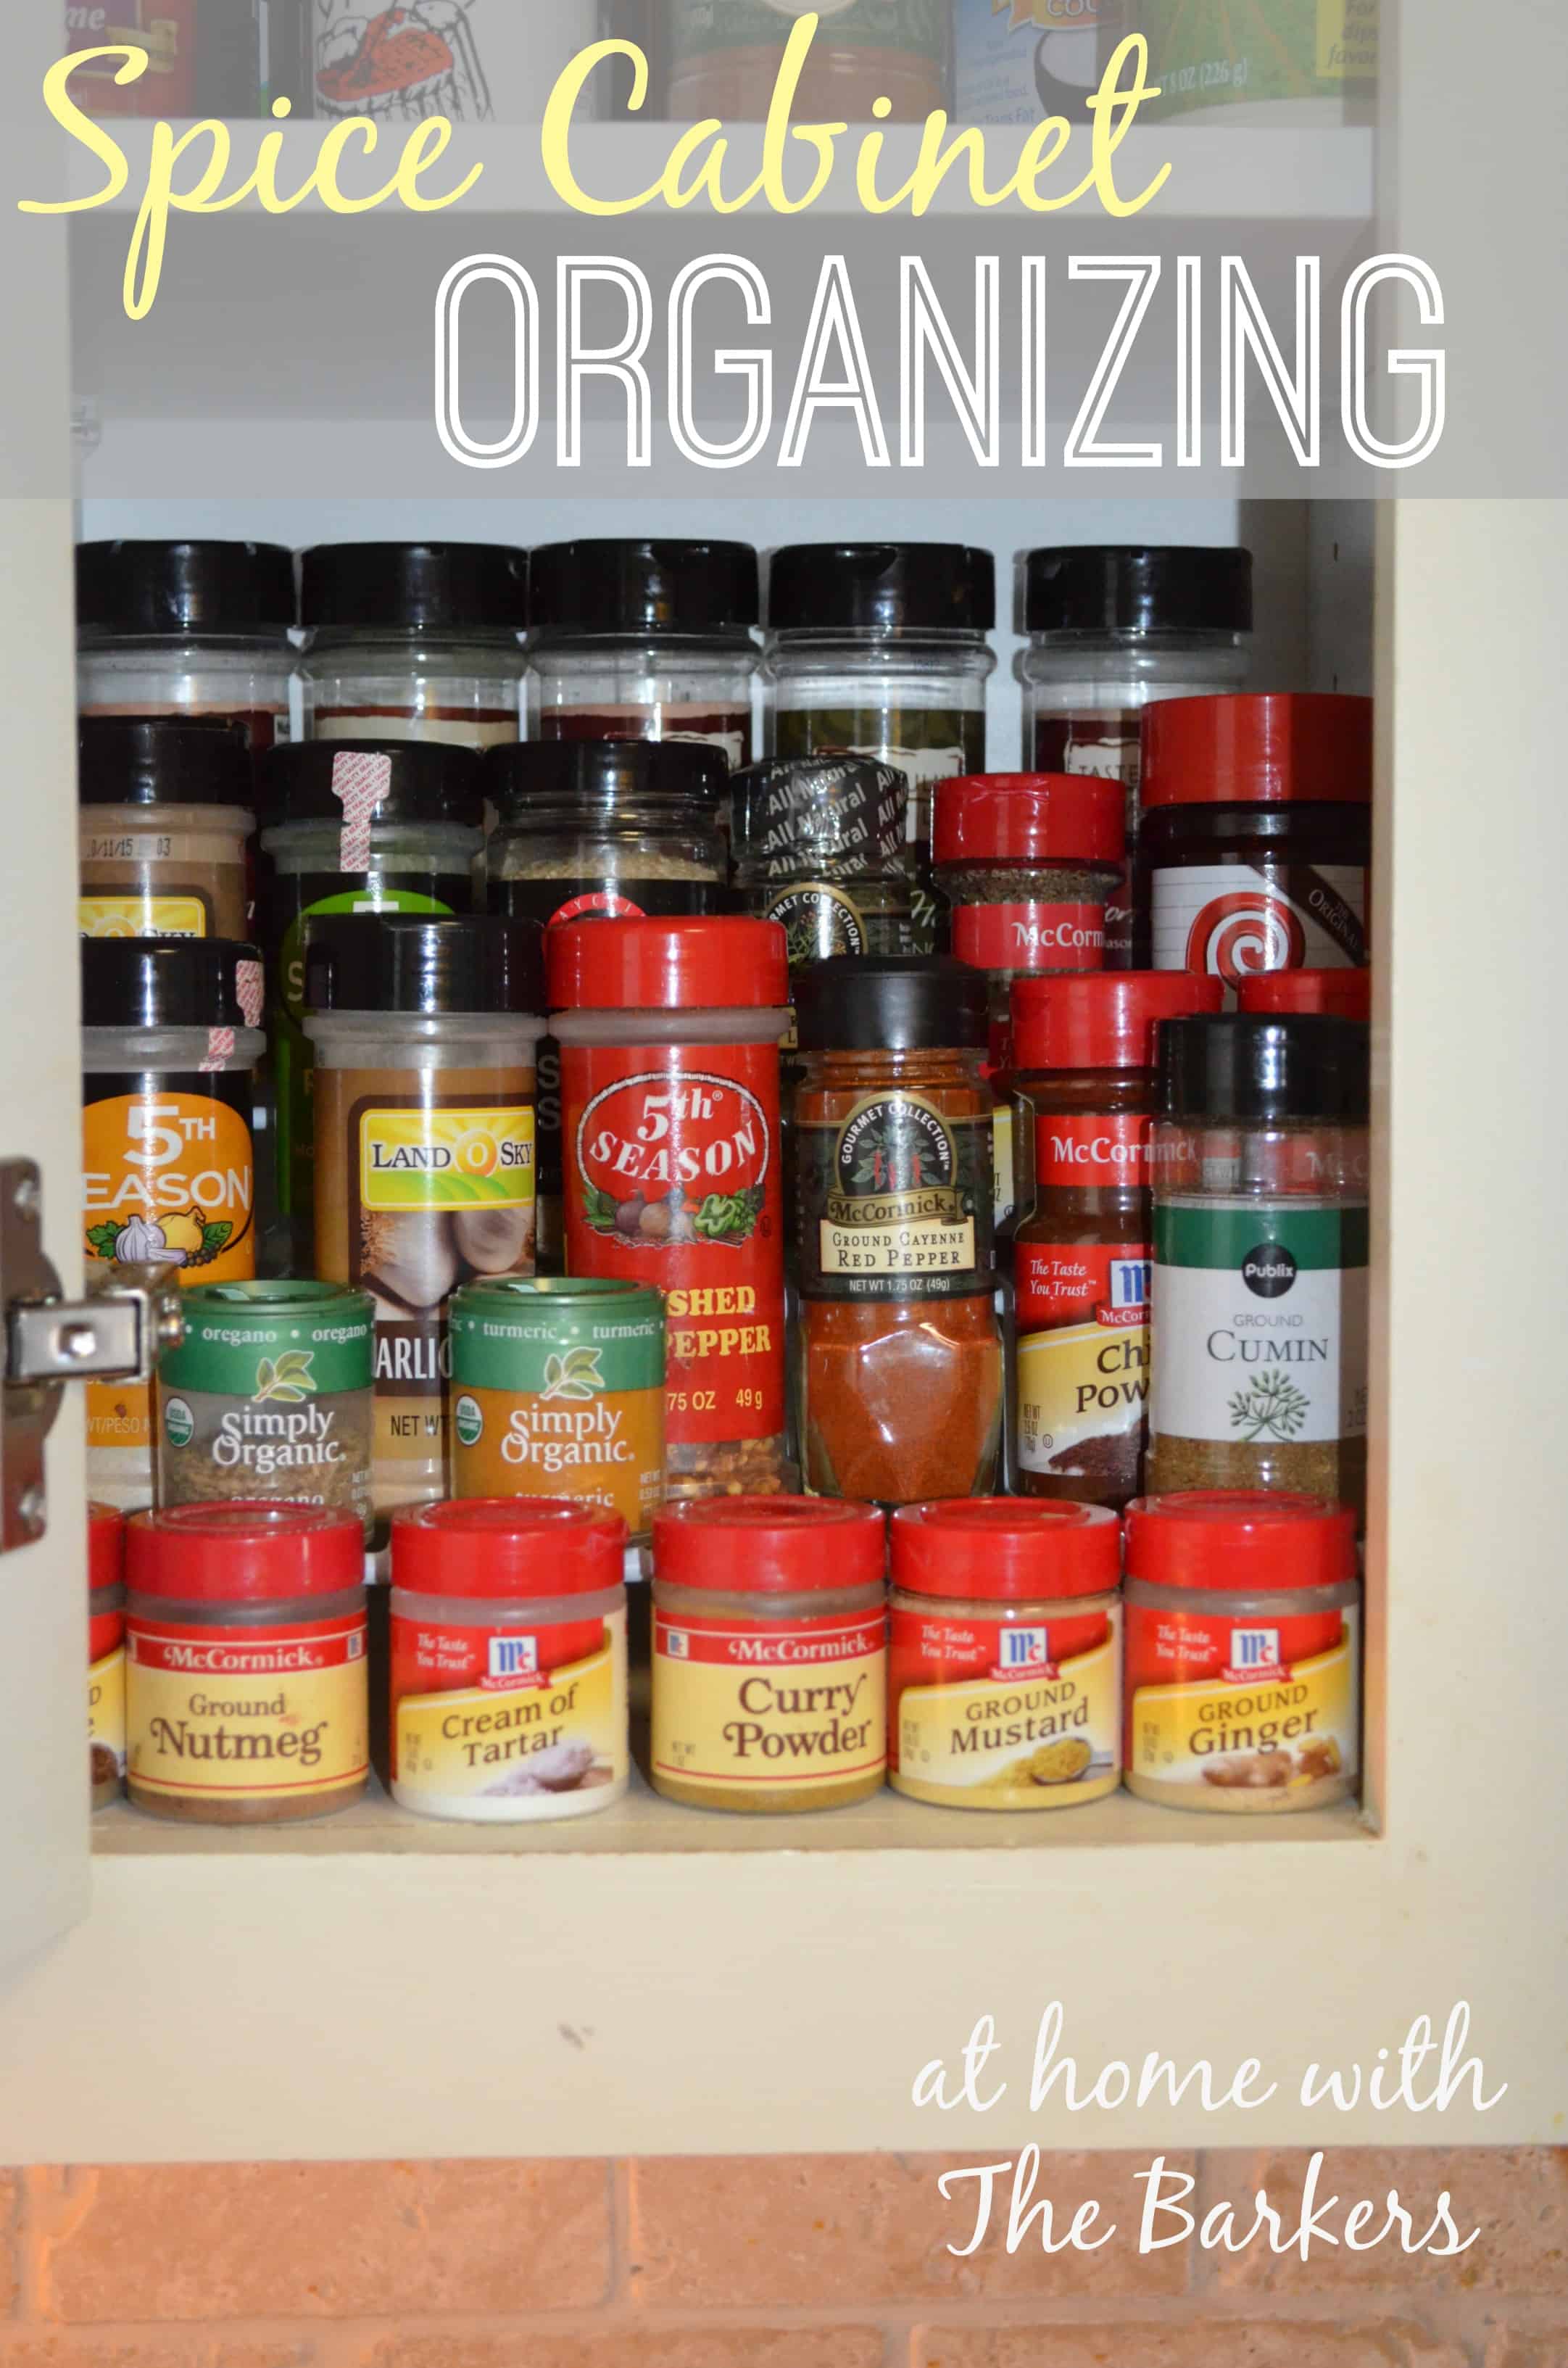 https://athomewiththebarkers.com/spice-cabinet-organizing/spice-cabinet-organizing-2/